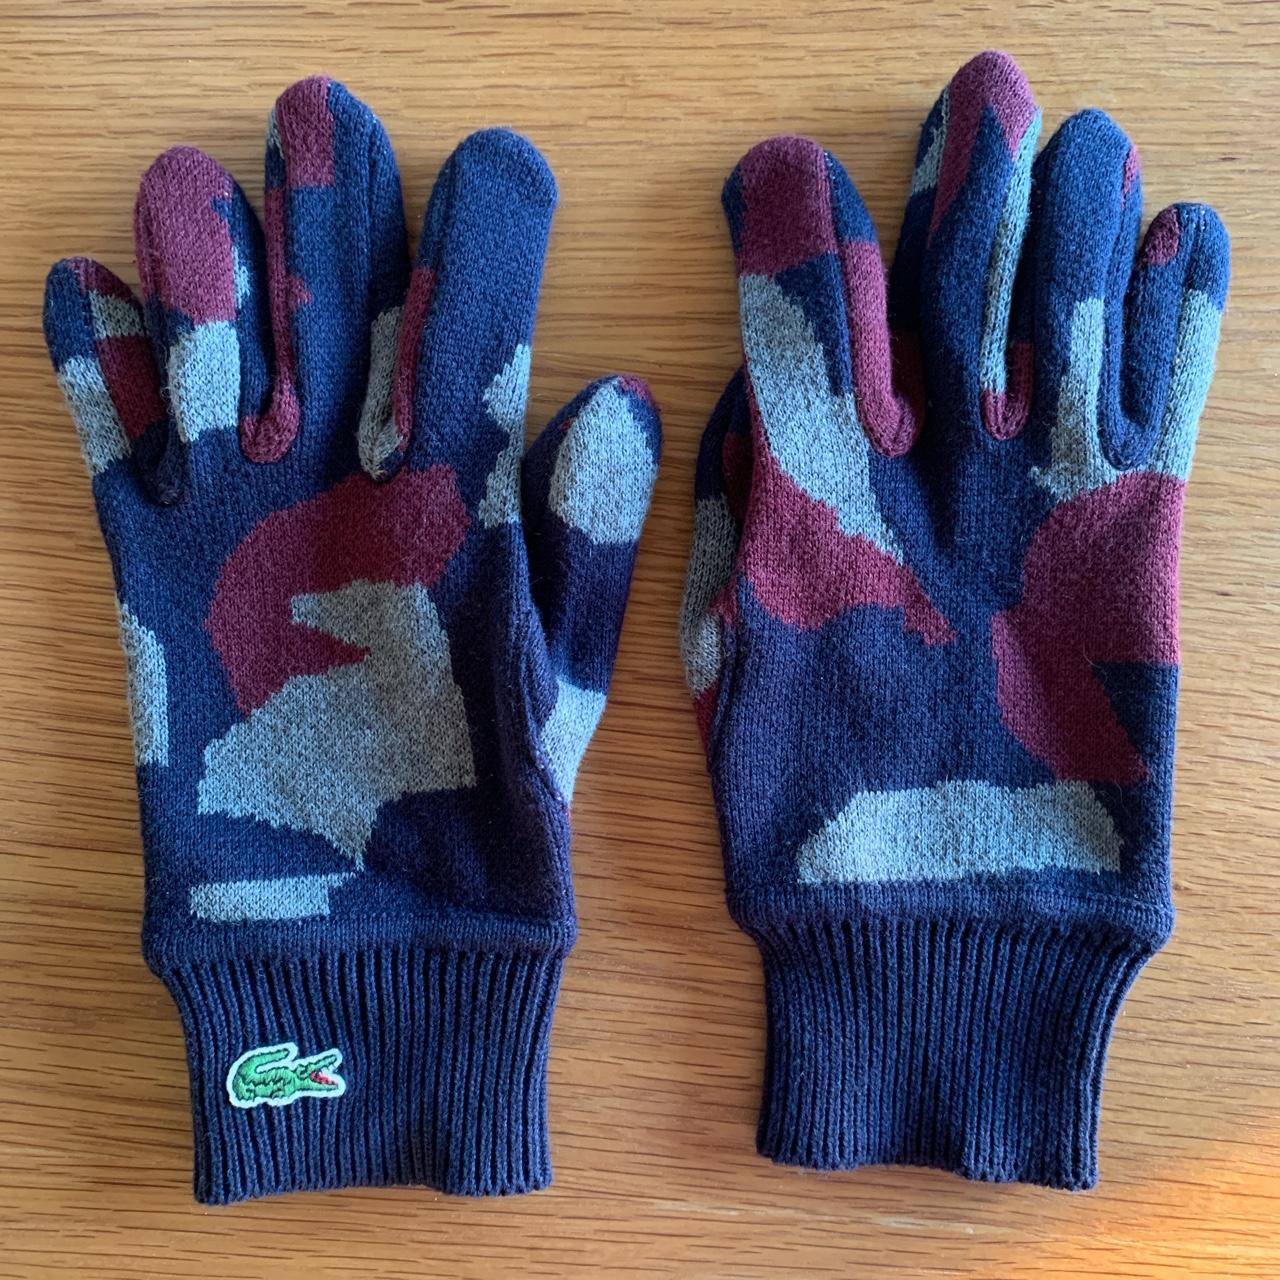 Lacoste Live Men's Burgundy and Navy Gloves